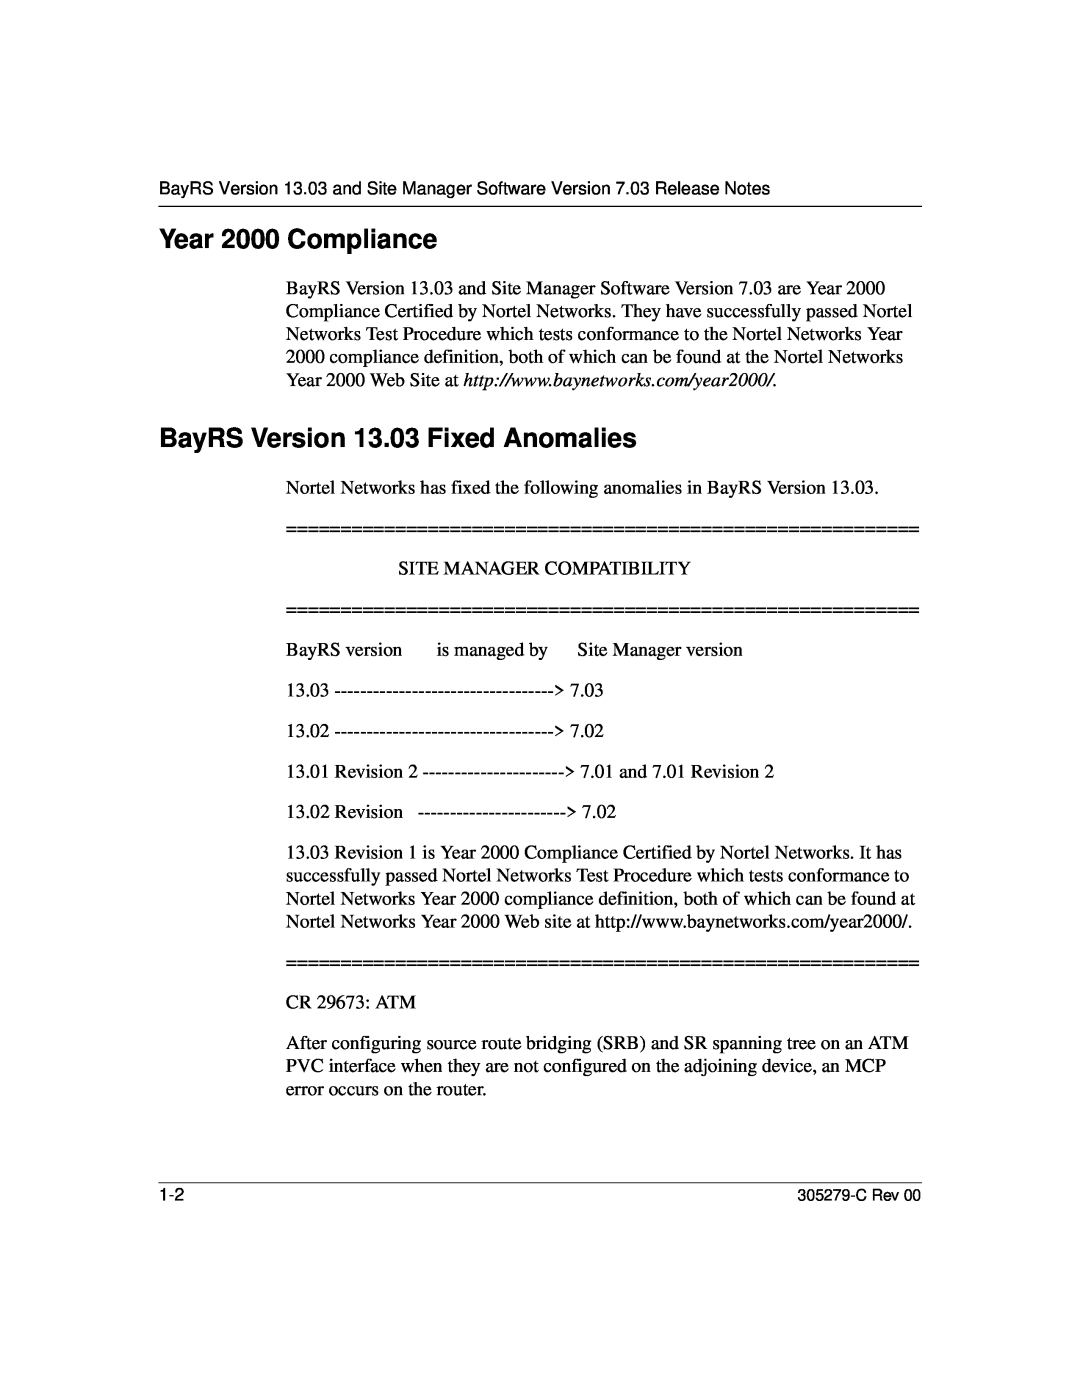 Nortel Networks manual Year 2000 Compliance, BayRS Version 13.03 Fixed Anomalies, Revision 